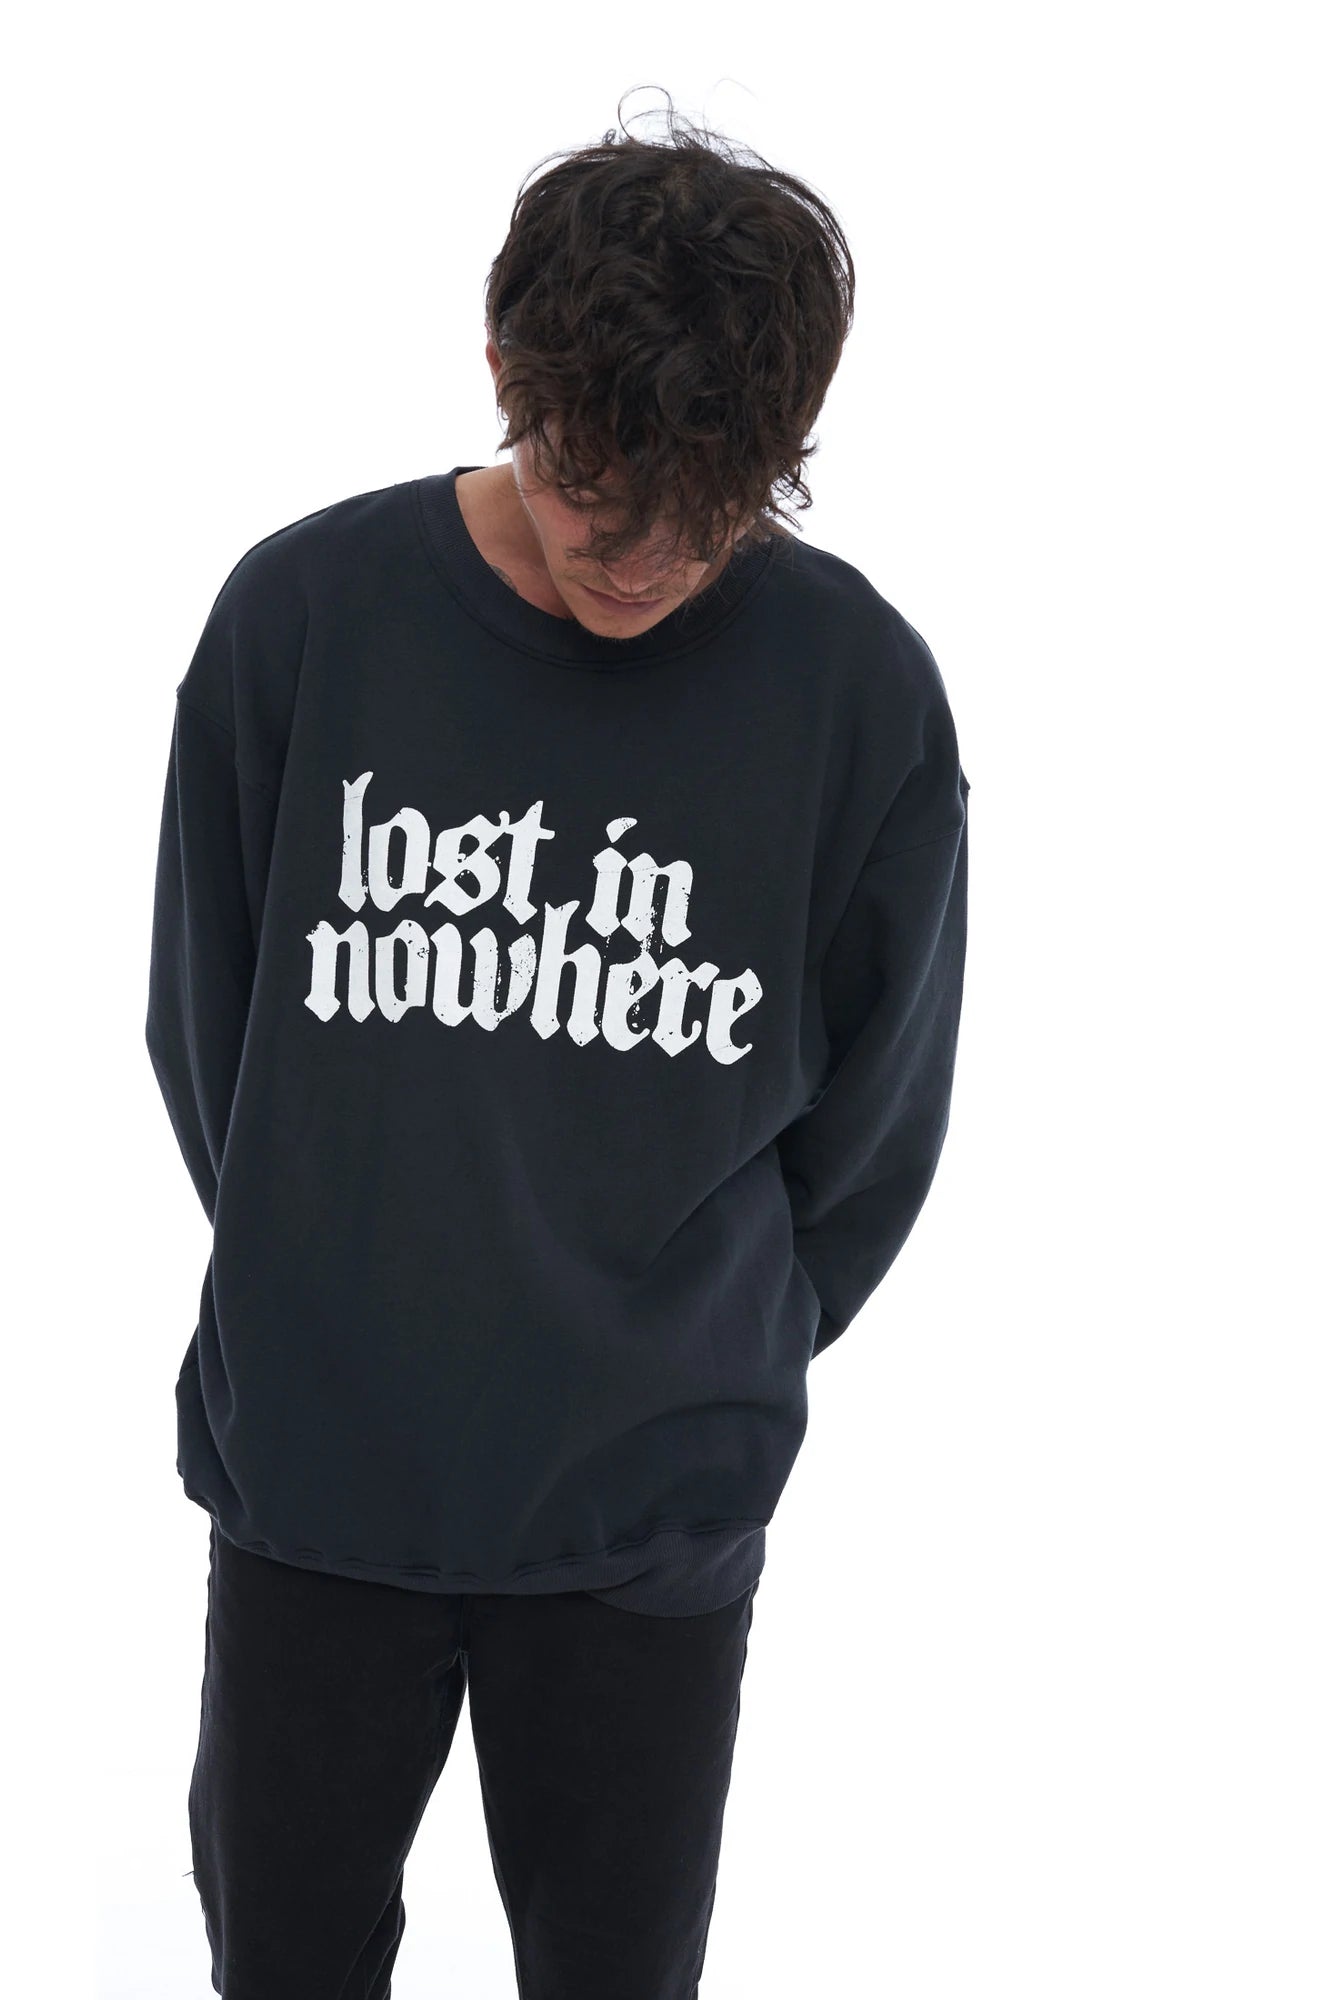 LOST IN NOWHERE // Old English Sweater BLACK